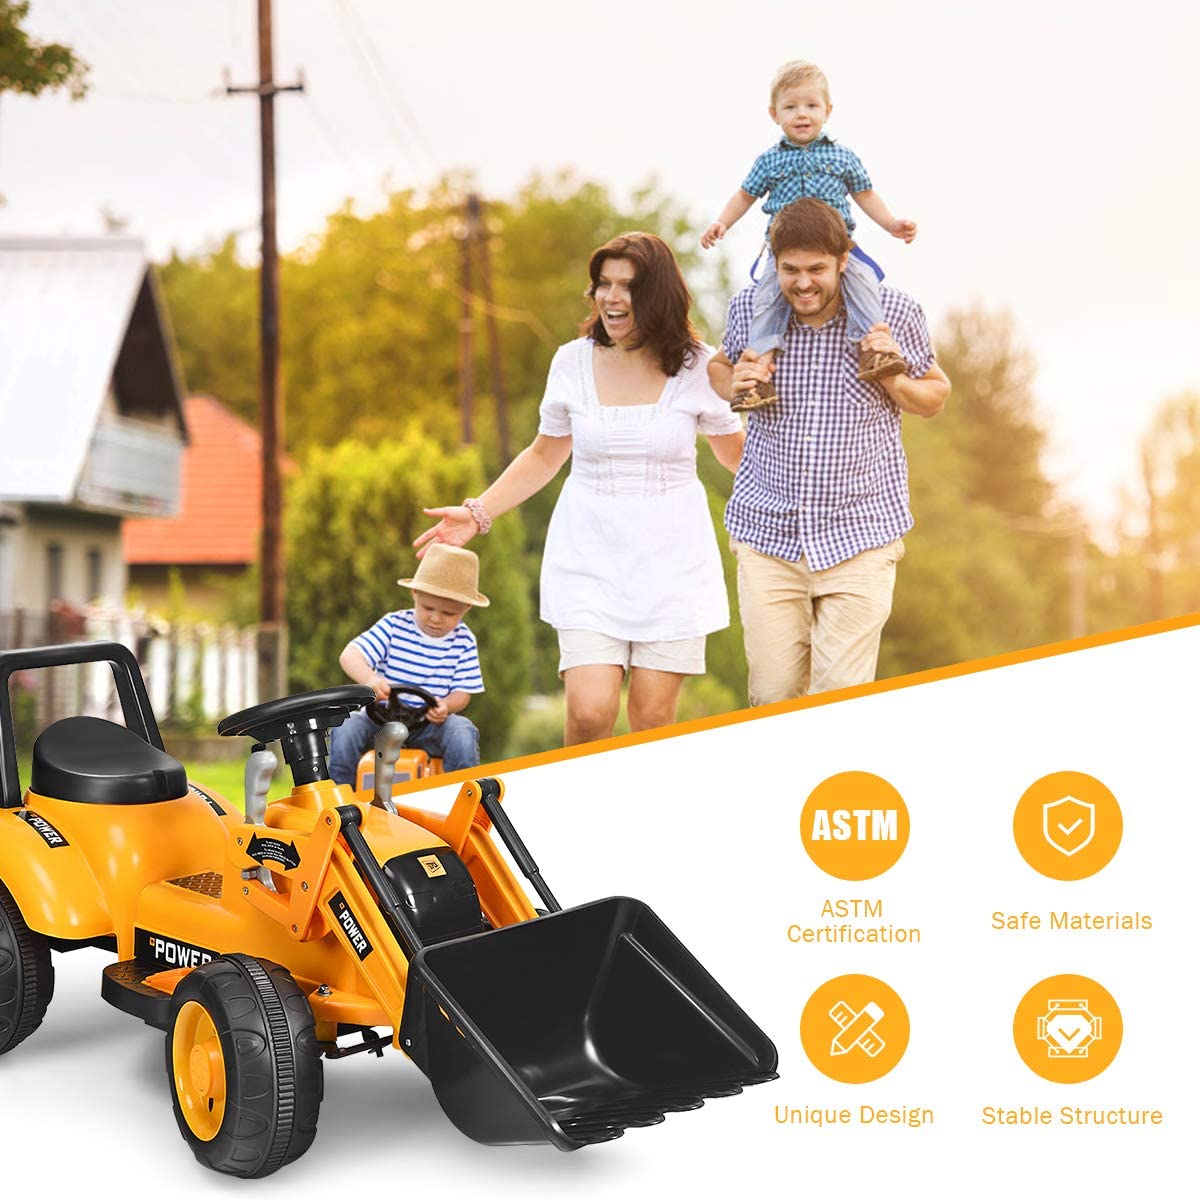 Chairliving 6V Battery Powered Electric Vehicle Construction Tractor Kids Ride On Excavator with Flexible Front Loader